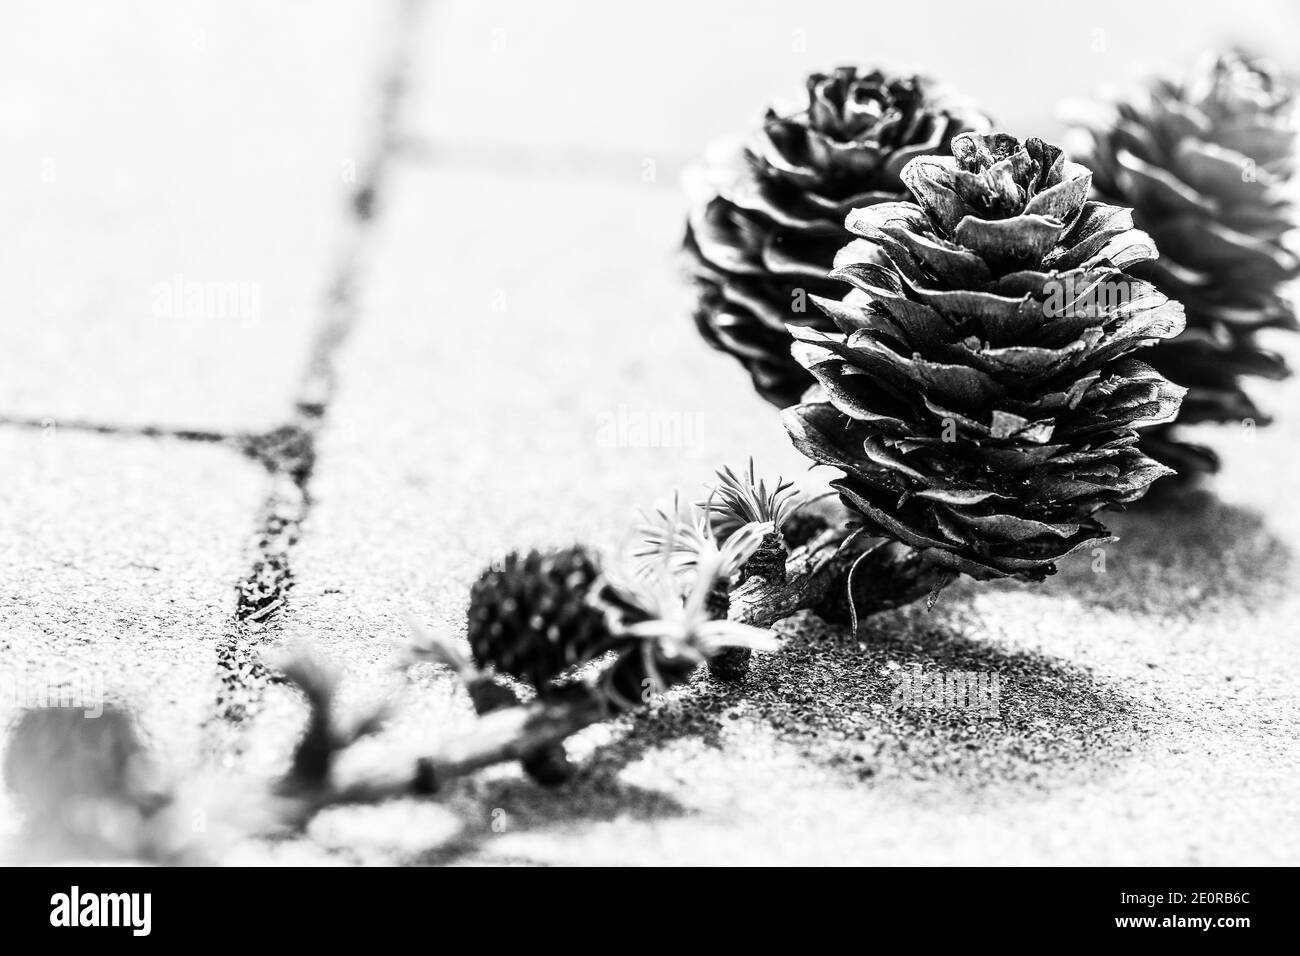 Twig of  larch coniferous tree with old cones and small new ones growing in springtime, black and white image Stock Photo